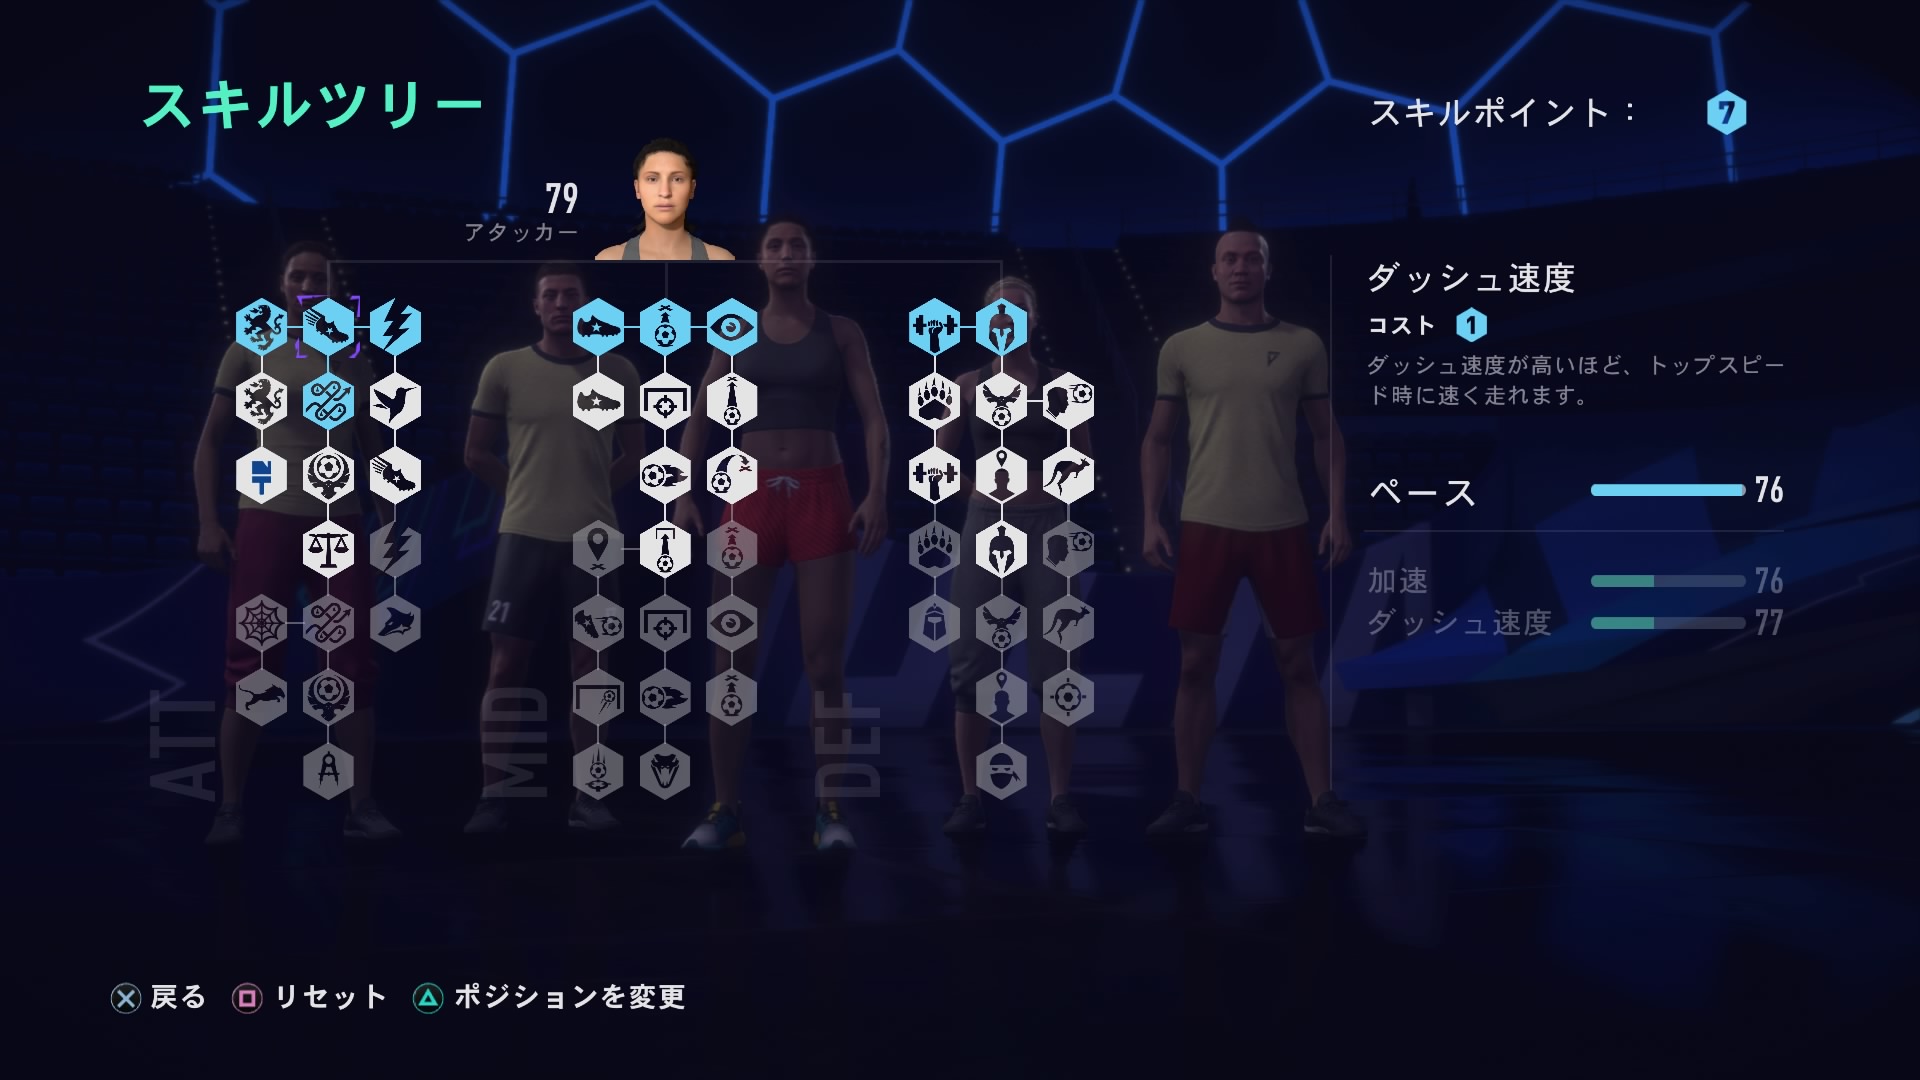 FIFA21は面白い Let's play game!